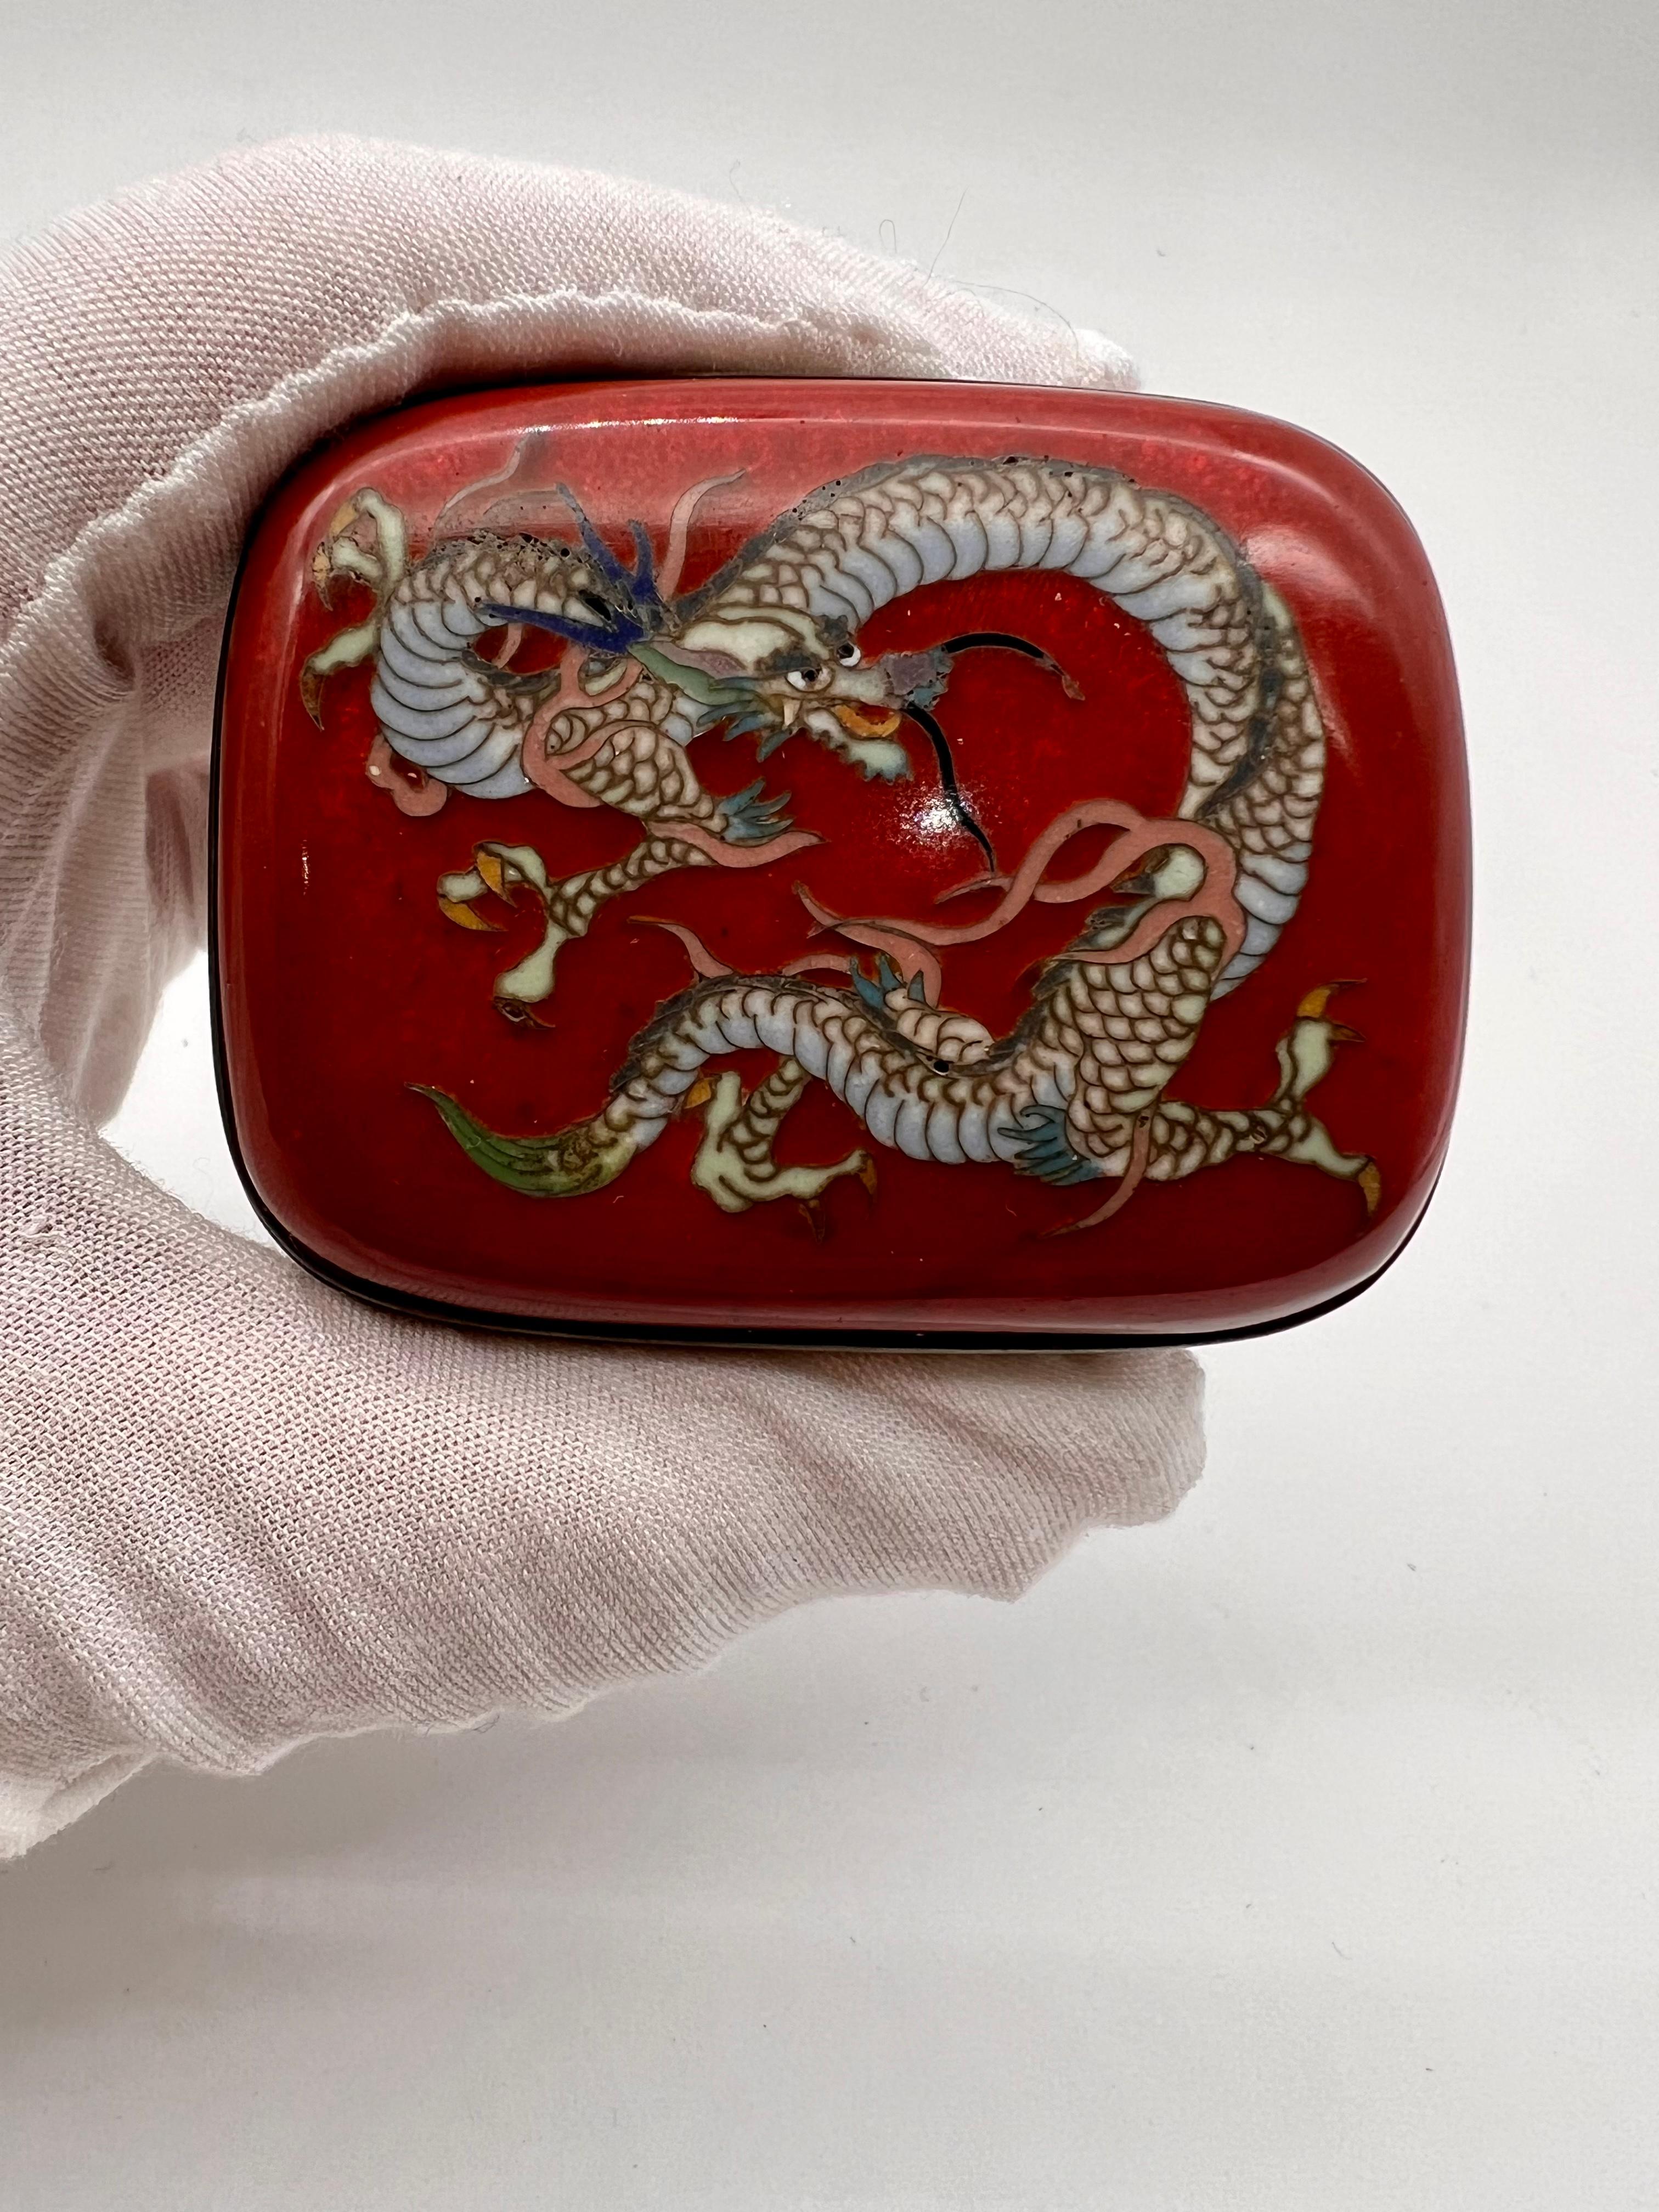 Exquisite Japanese Cloisonne Enamel Box and Cover. 19th C For Sale 11